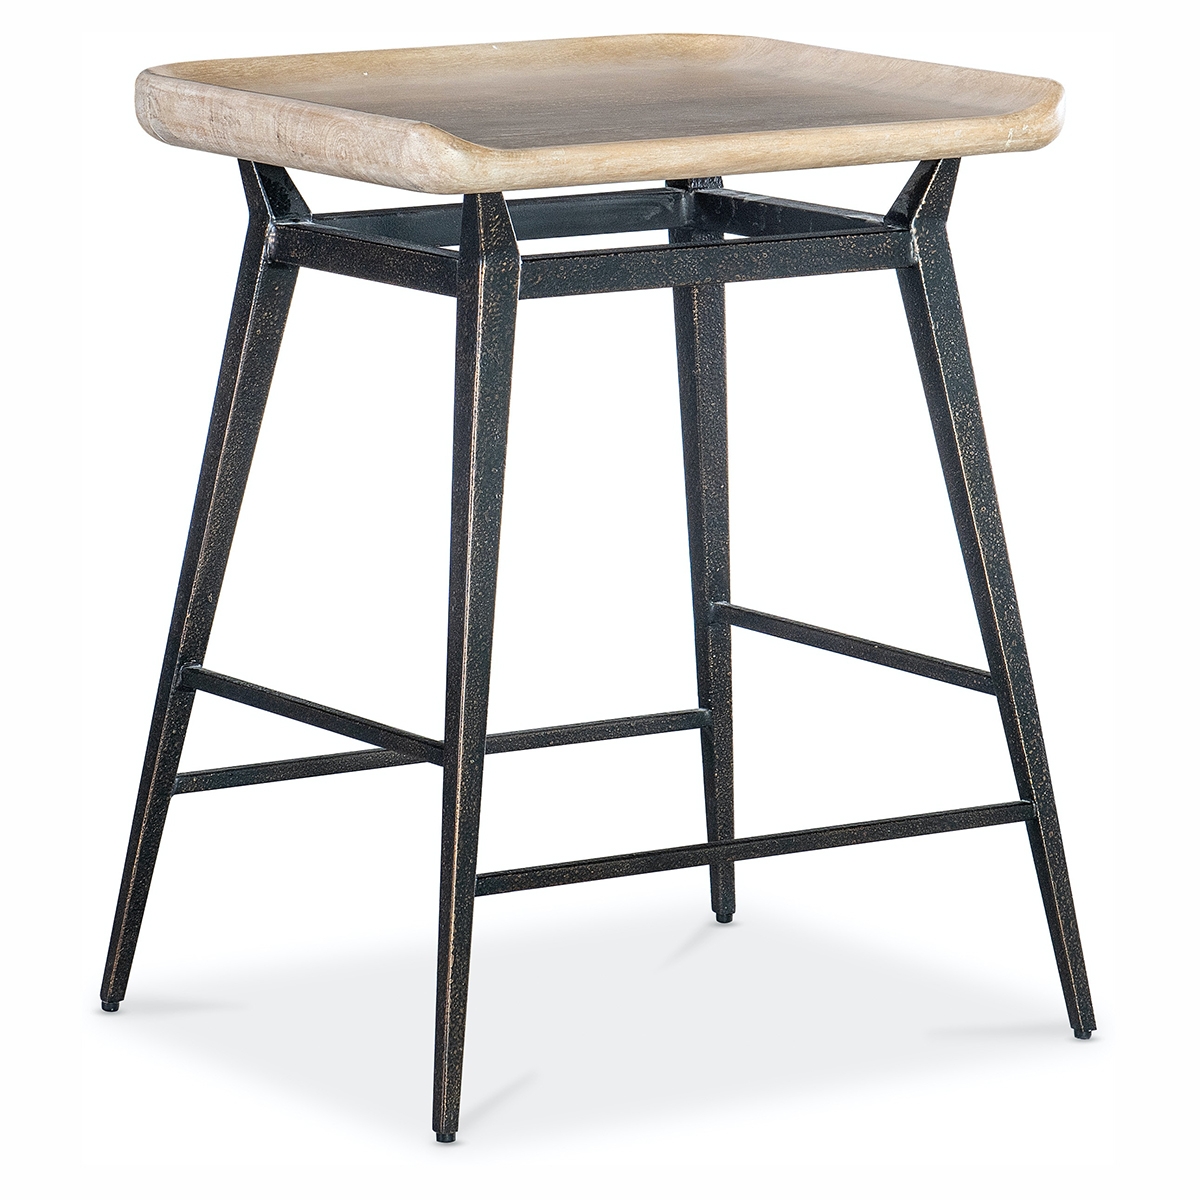 Picture of RETREAT TAN STOOL